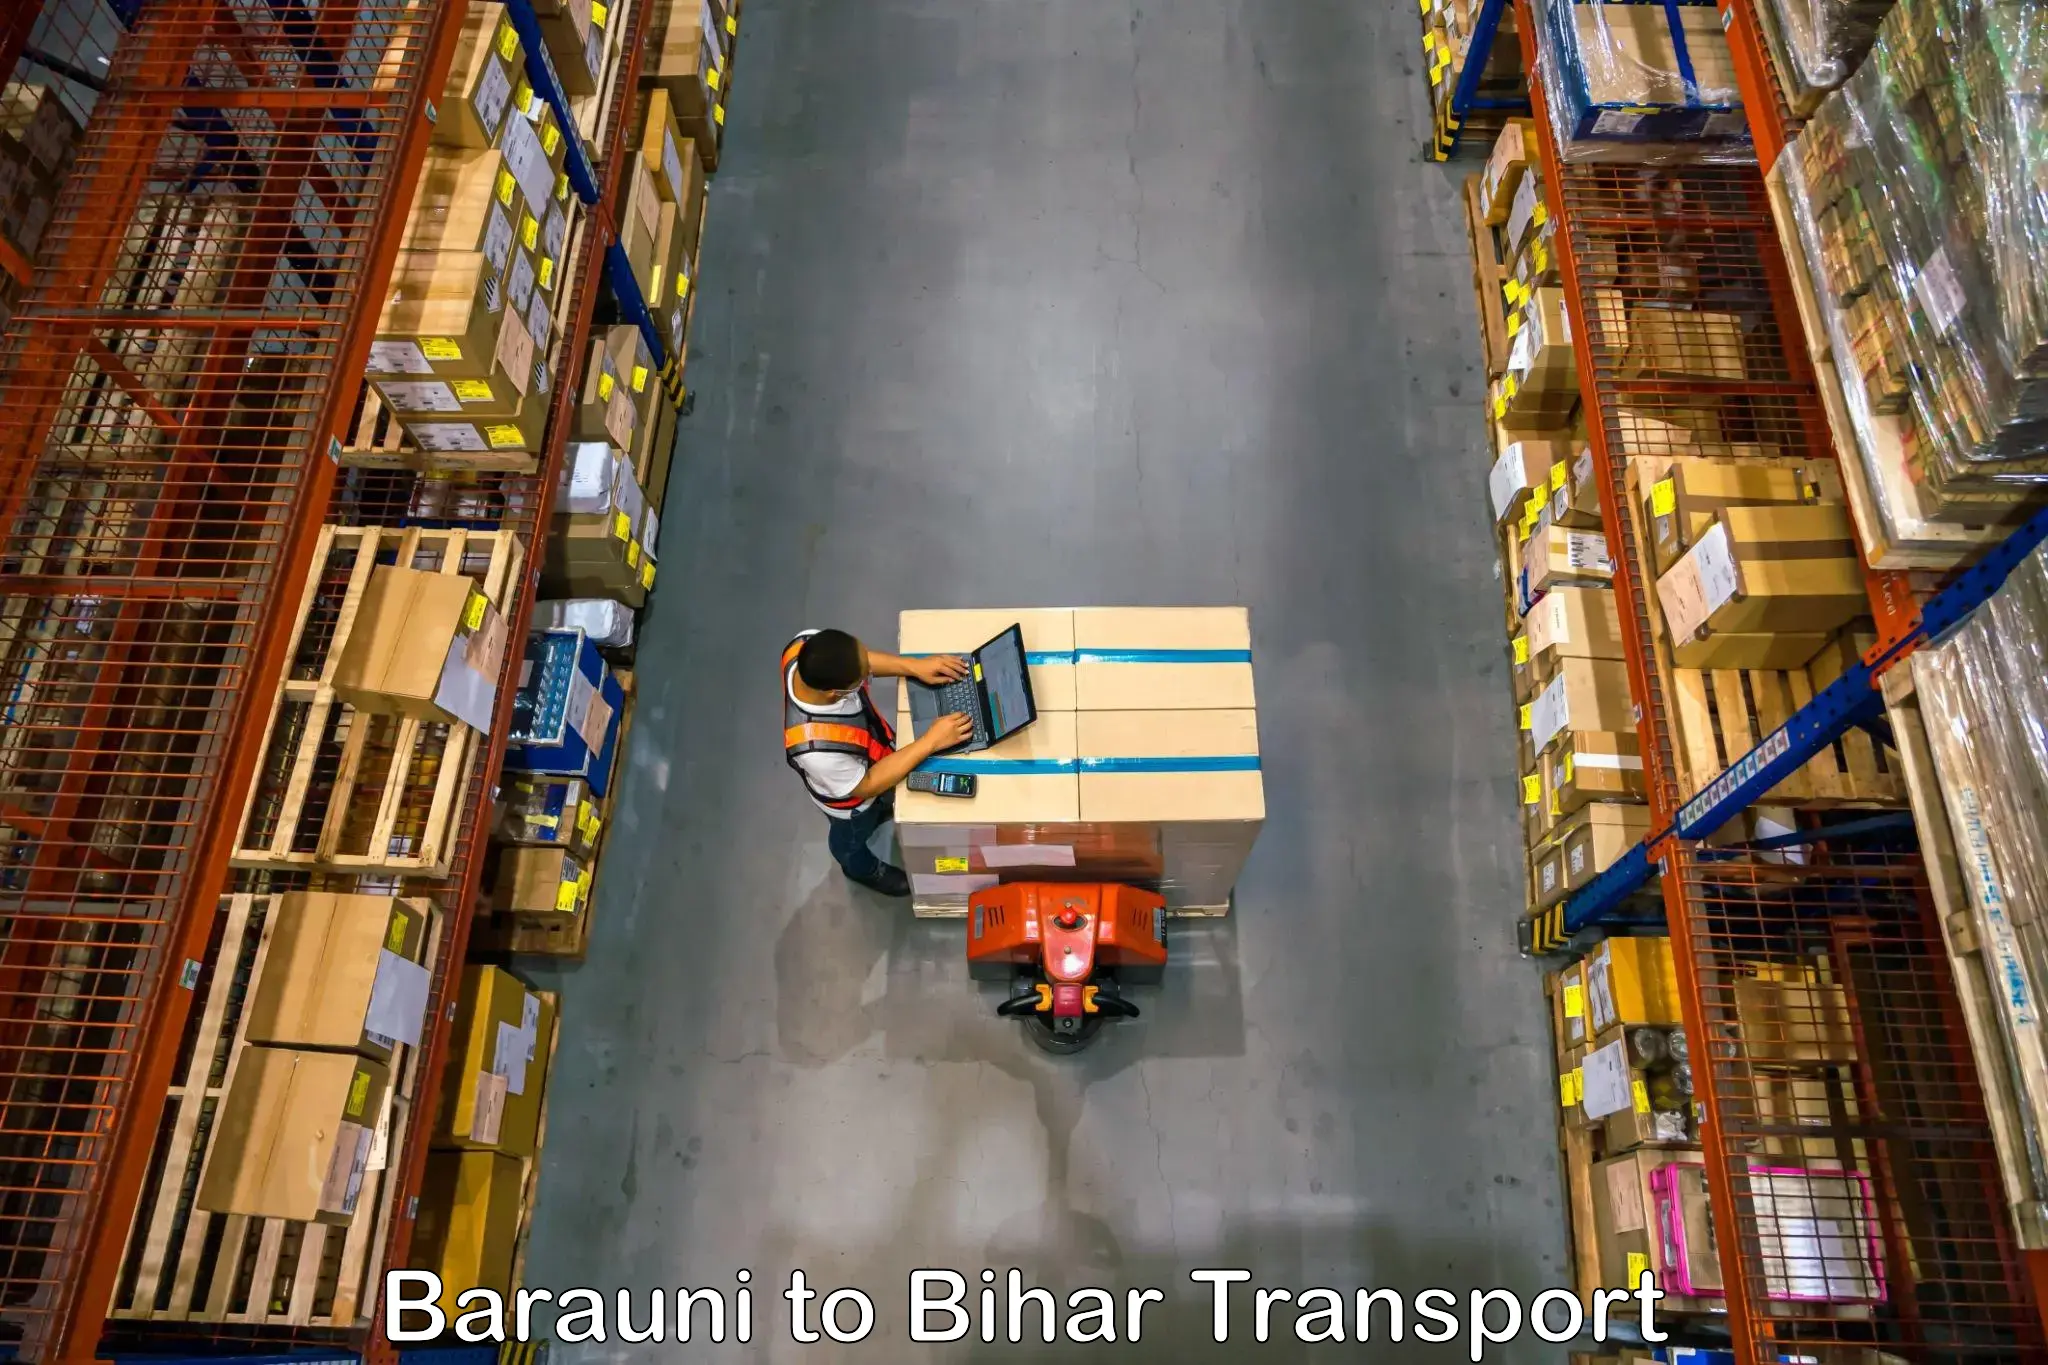 Goods delivery service Barauni to Bakhri